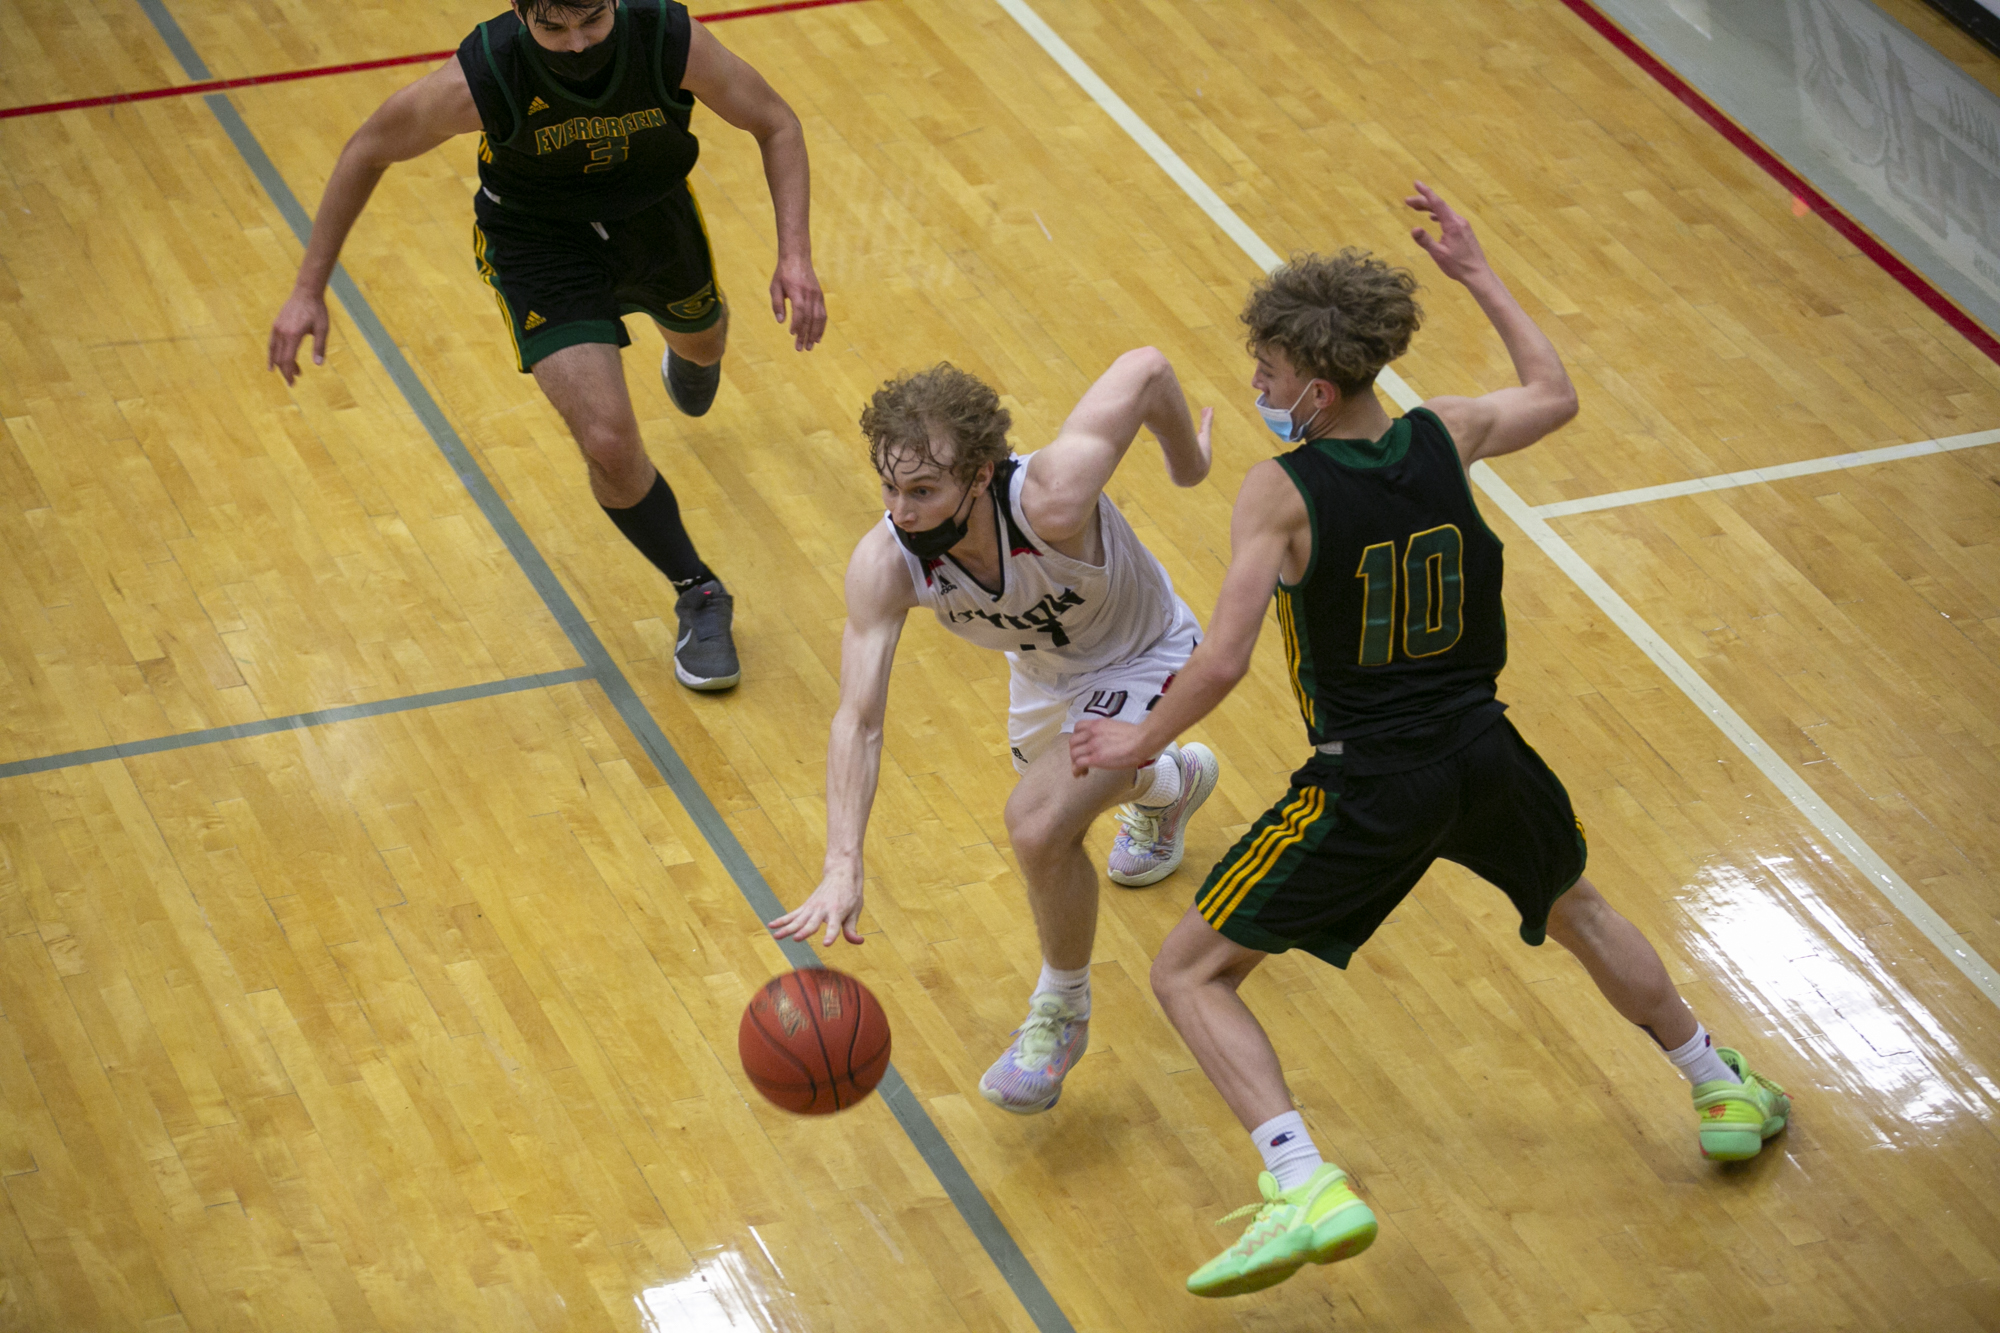 Union's Bryson Metz dribbles down court under pressure from Evergreen players in the 4A/3A GSHL boys basketball playoff game at Union High School on Thursday, June 3, 2021.